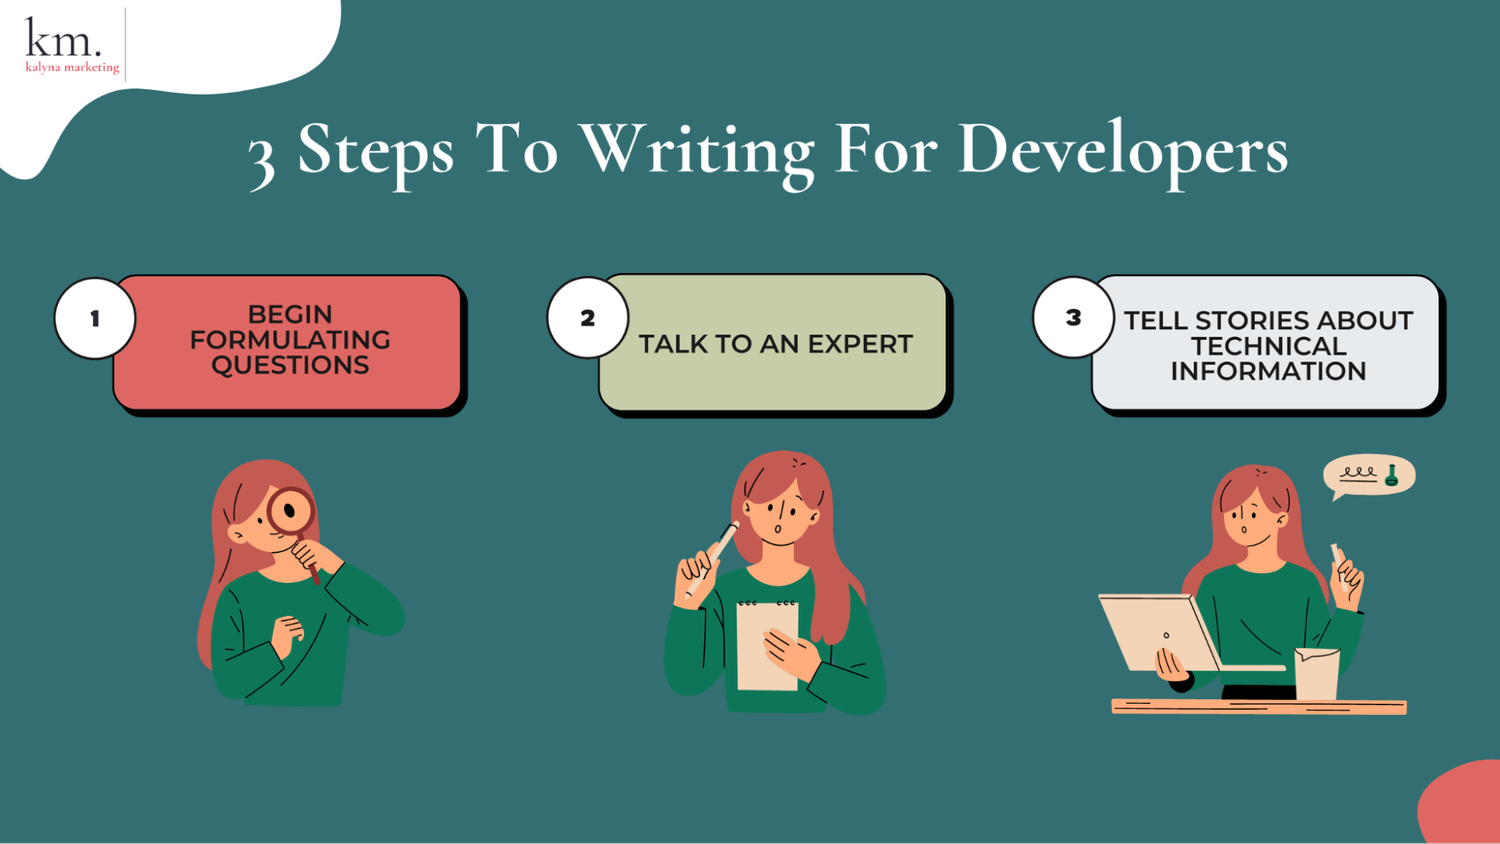 3 Steps To Writing For Developers BEGIN FORMULATING QUESTIONS 3 I TALK TO AN EXPERT TELL STORIES ABOUT TECHNICAL INFORMATION